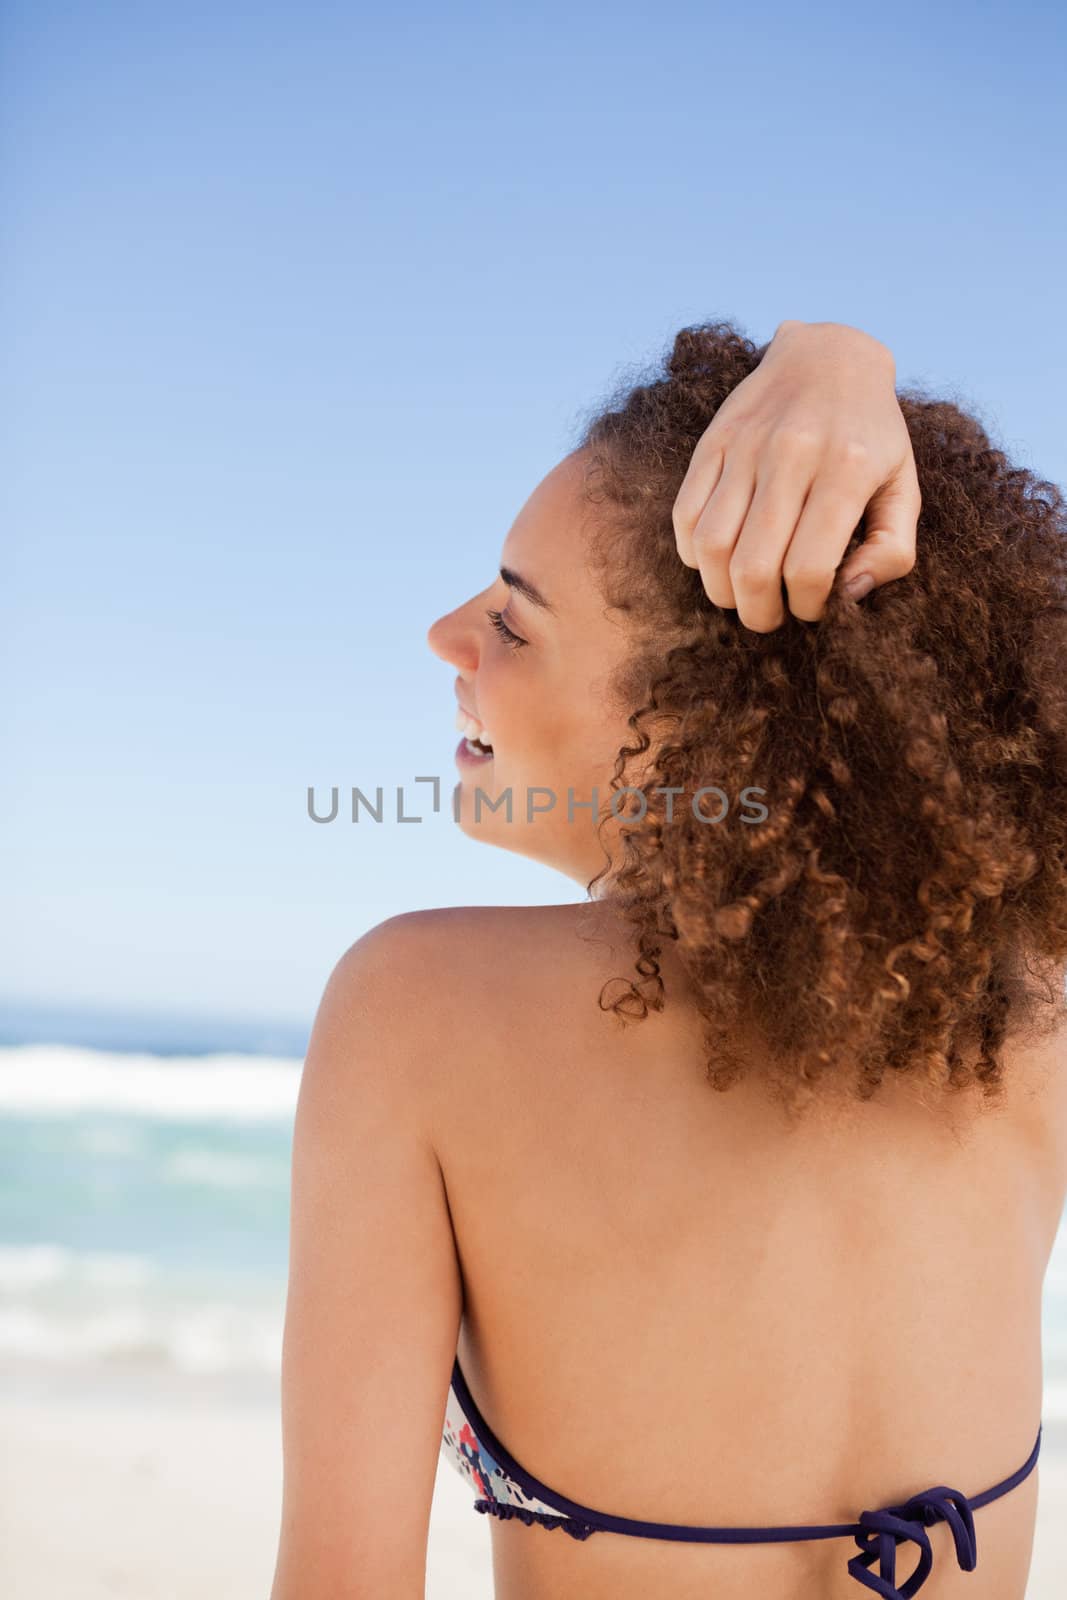 Back view of an attractive woman placing her hand on her hair in front of the sea